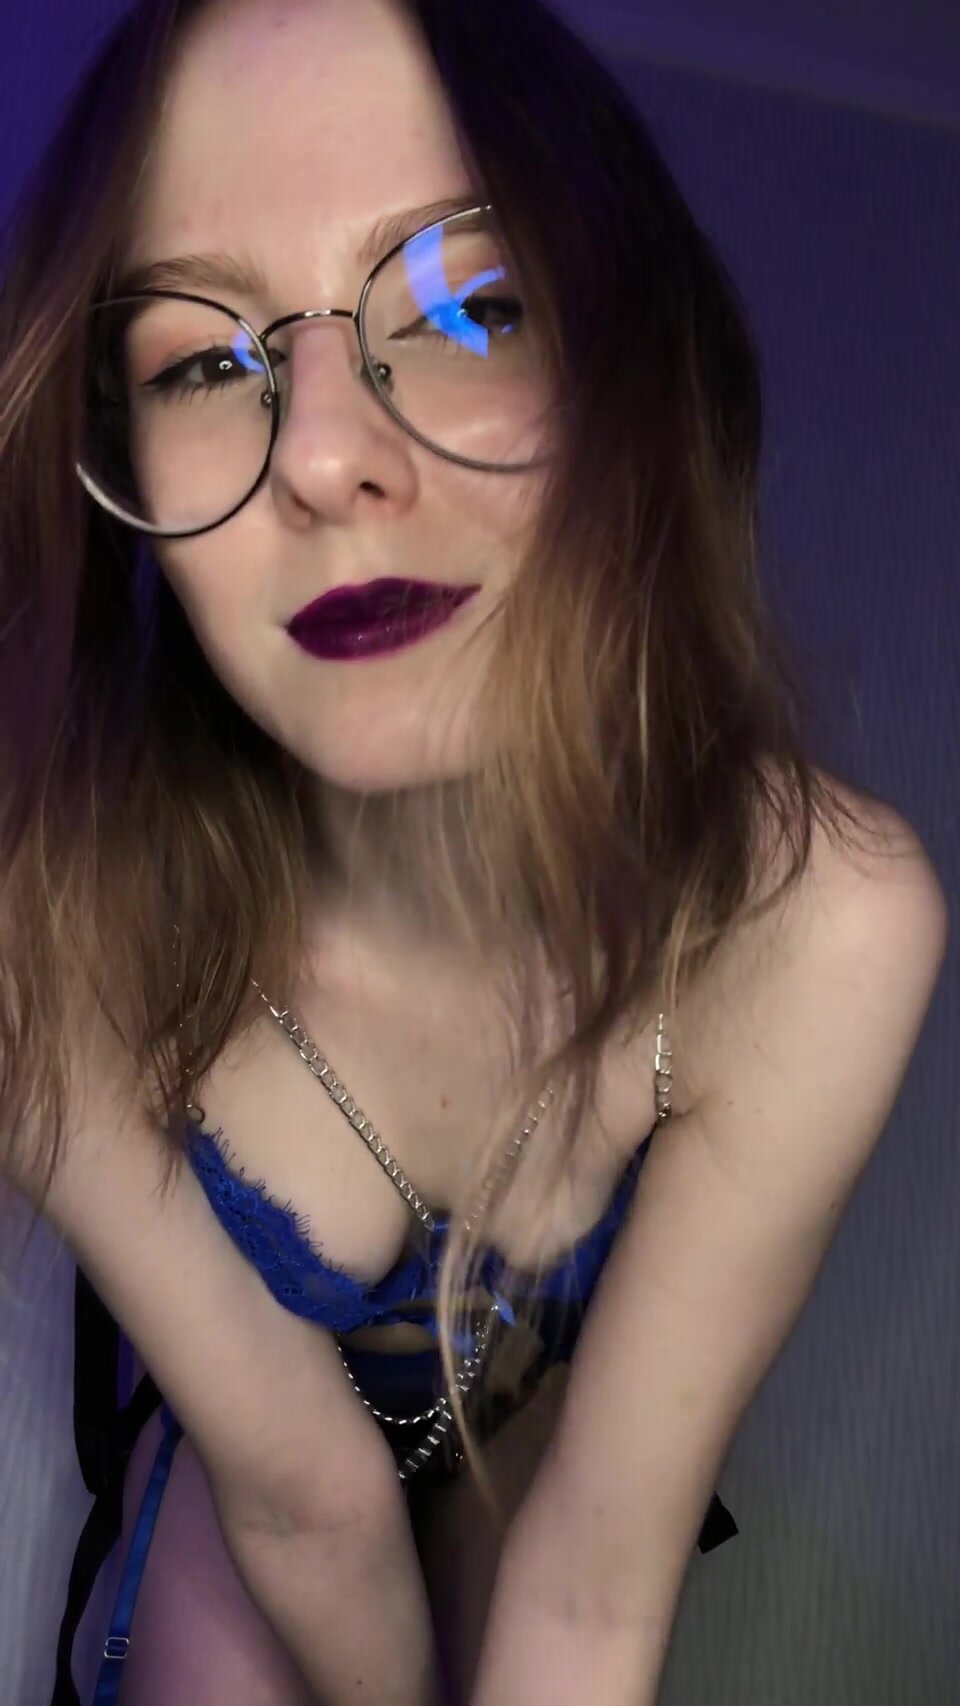 You can beg and plead all you want, but you know you're going to take my black cock like a good boy.